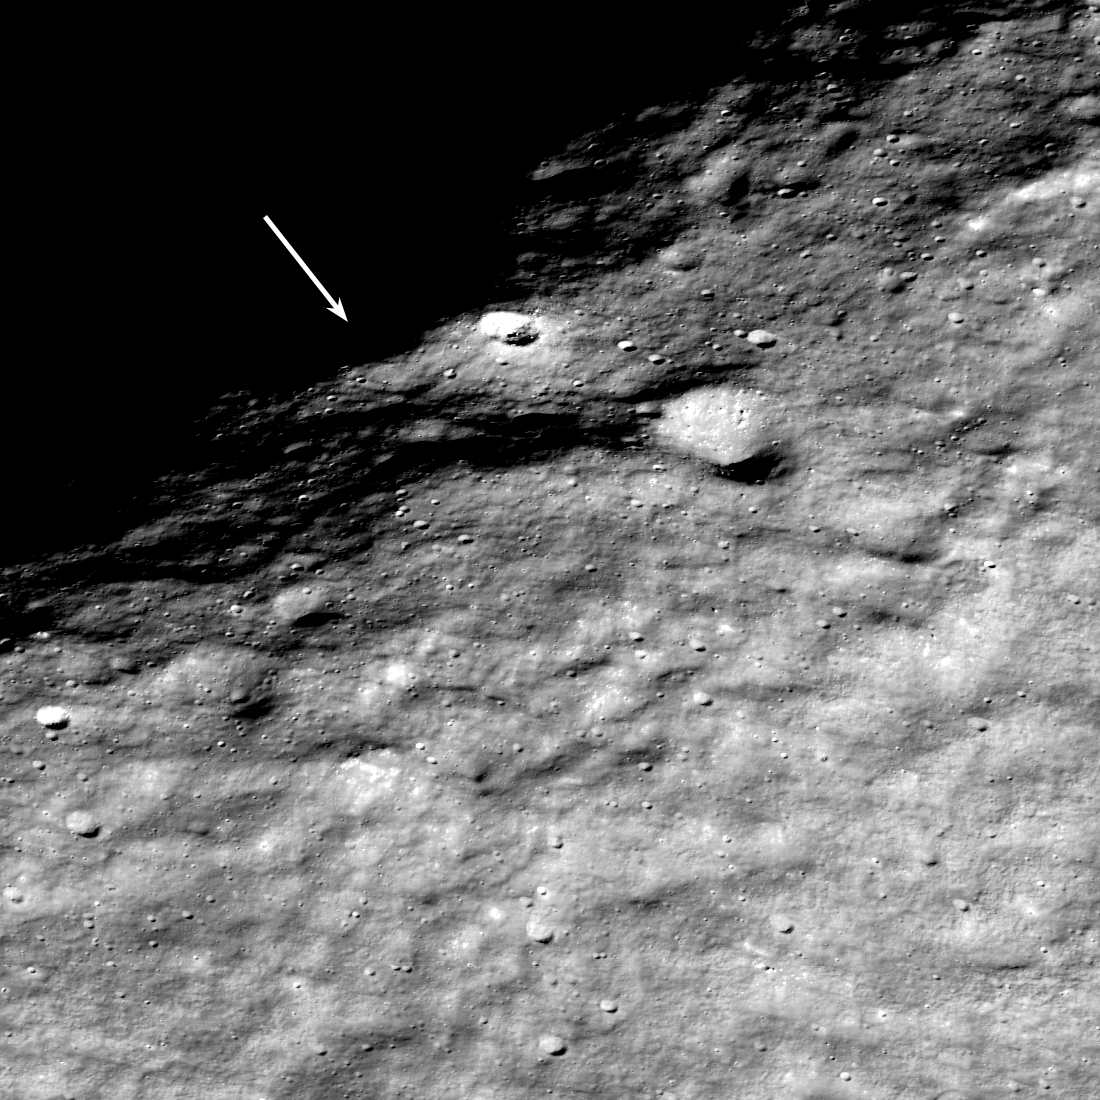 Where is the South Pole? Lunar Reconnaissance Orbiter Camera